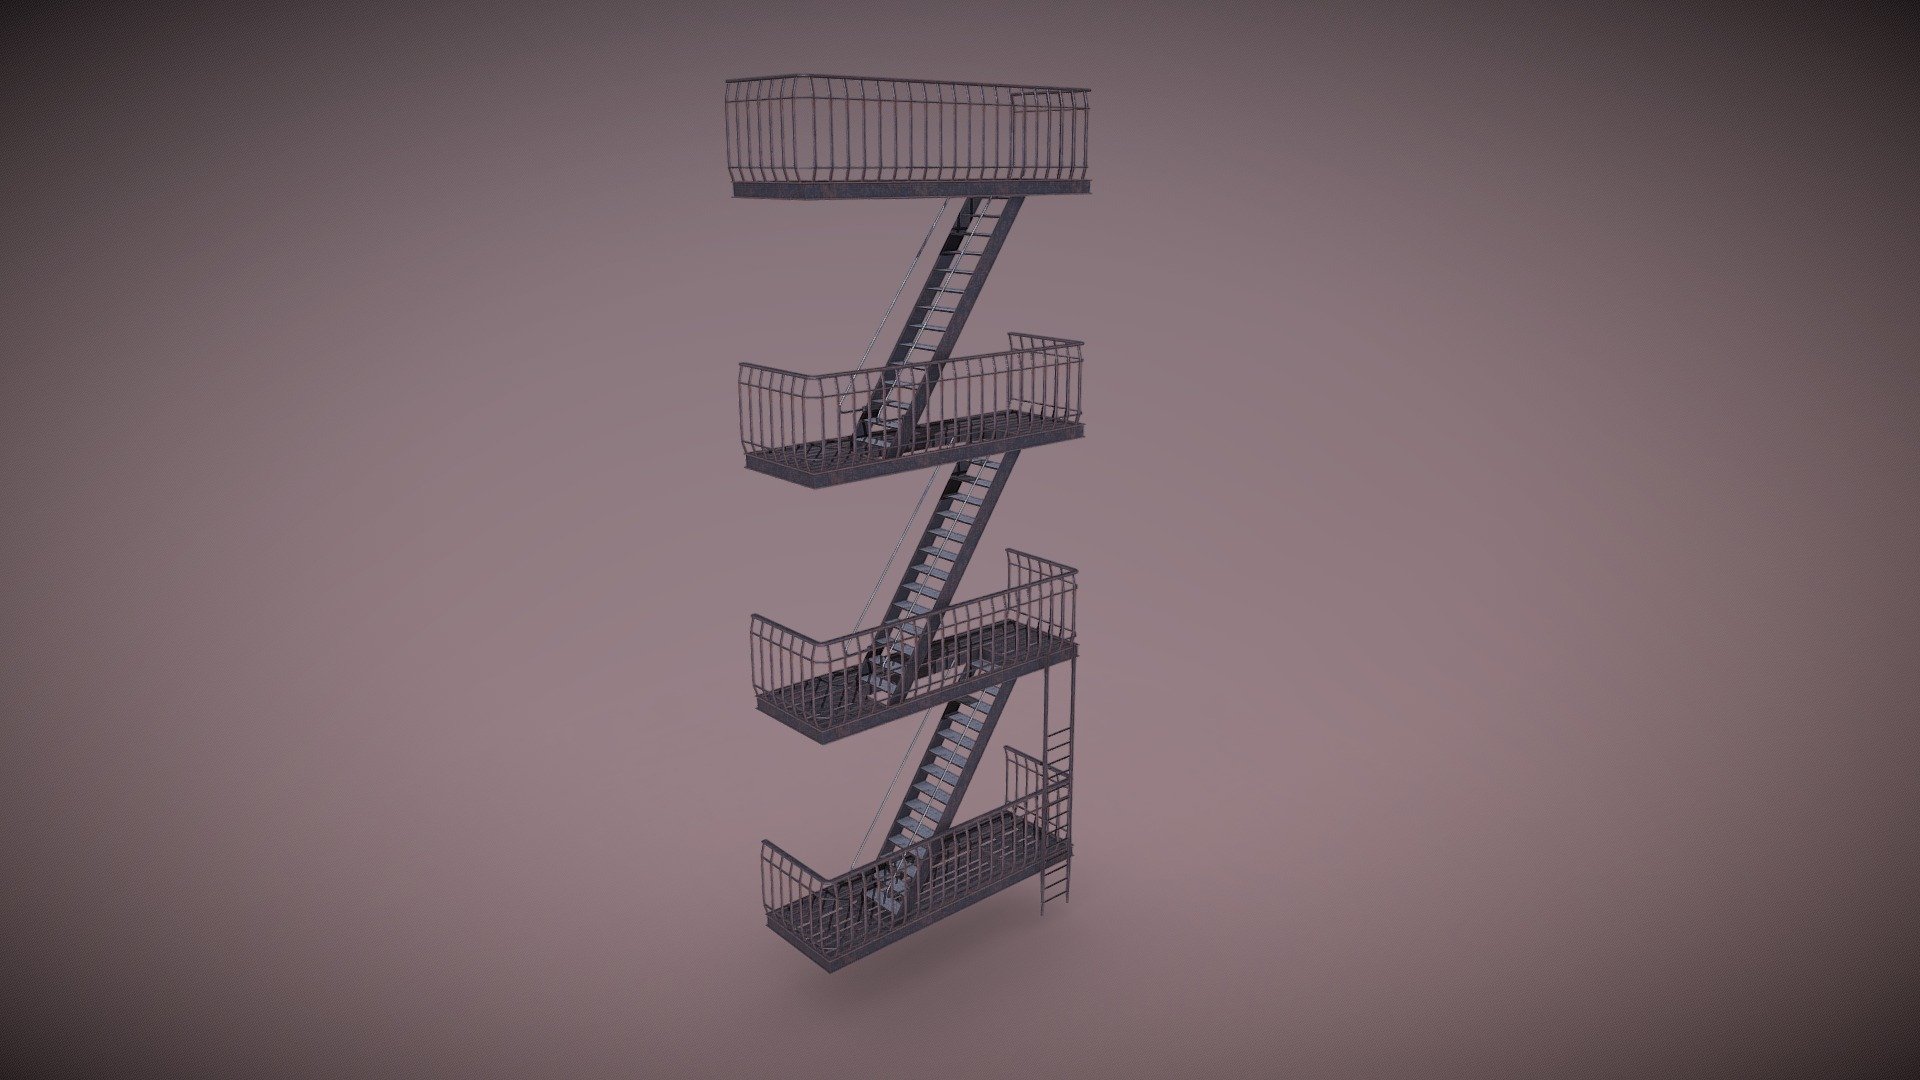 A modular fire escape set, composed of 3 pieces so the hieght this set goes to is adjustable. Packing all the Uvs into a signular tile was the biggest issue on this asset by far as there was a lot of fiddling making sure stacked Uvs werent showing AO or the like from other faces.

Again I chose to go a singular low poly model baked on itself in Marmoset, then quickly textured in Substance 3d model